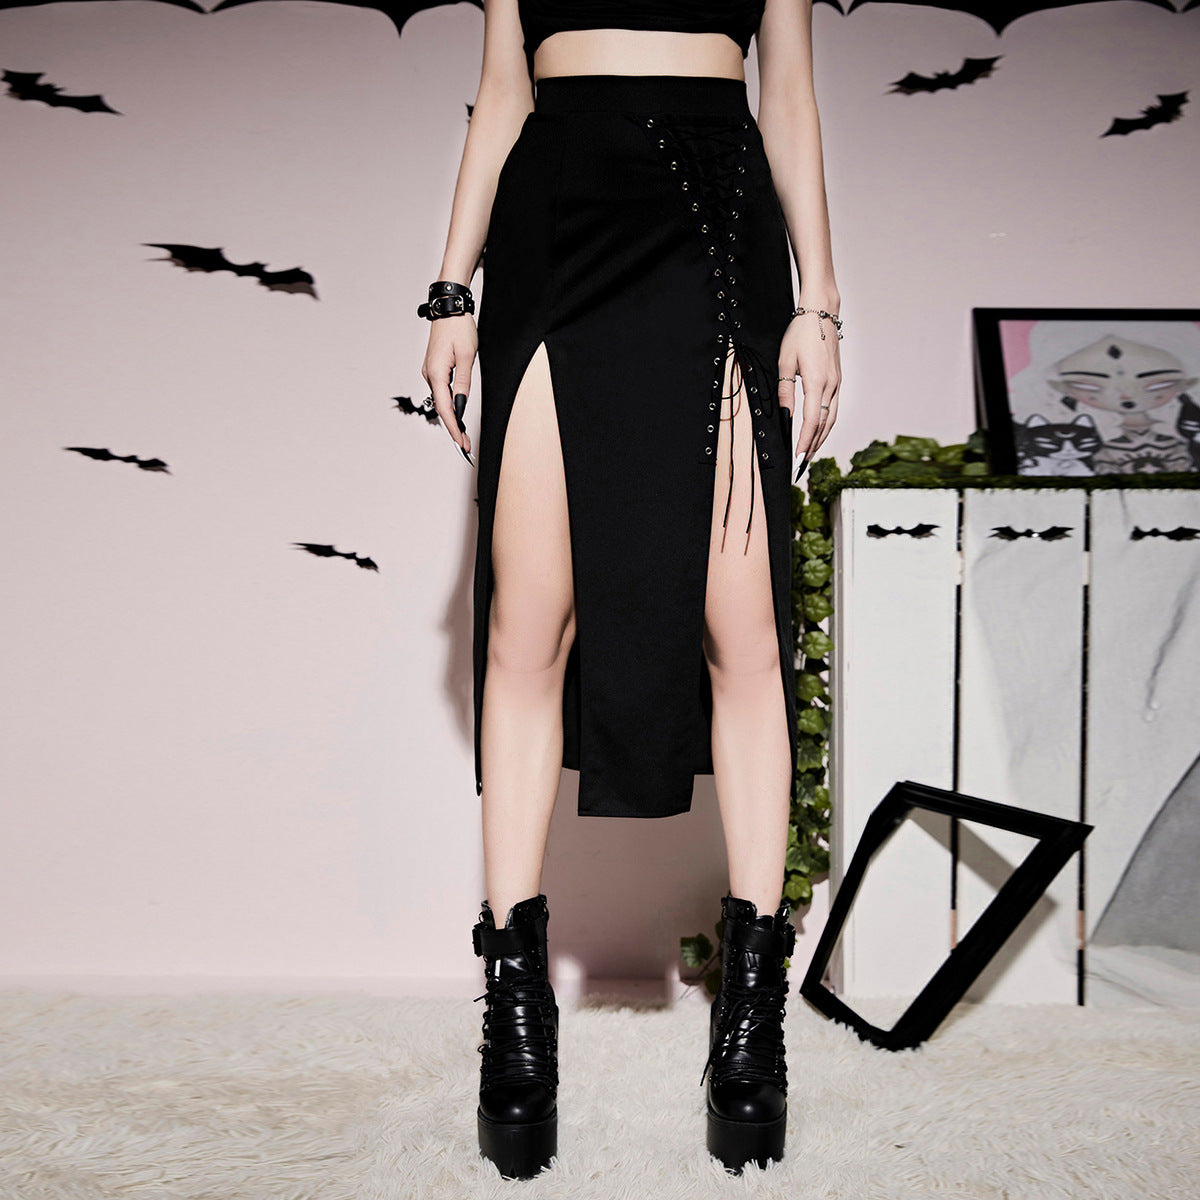 A woman in a Maramalive™ Gothic Style Lacing Half Skirt with thigh splits posing in front of a wall with bats.